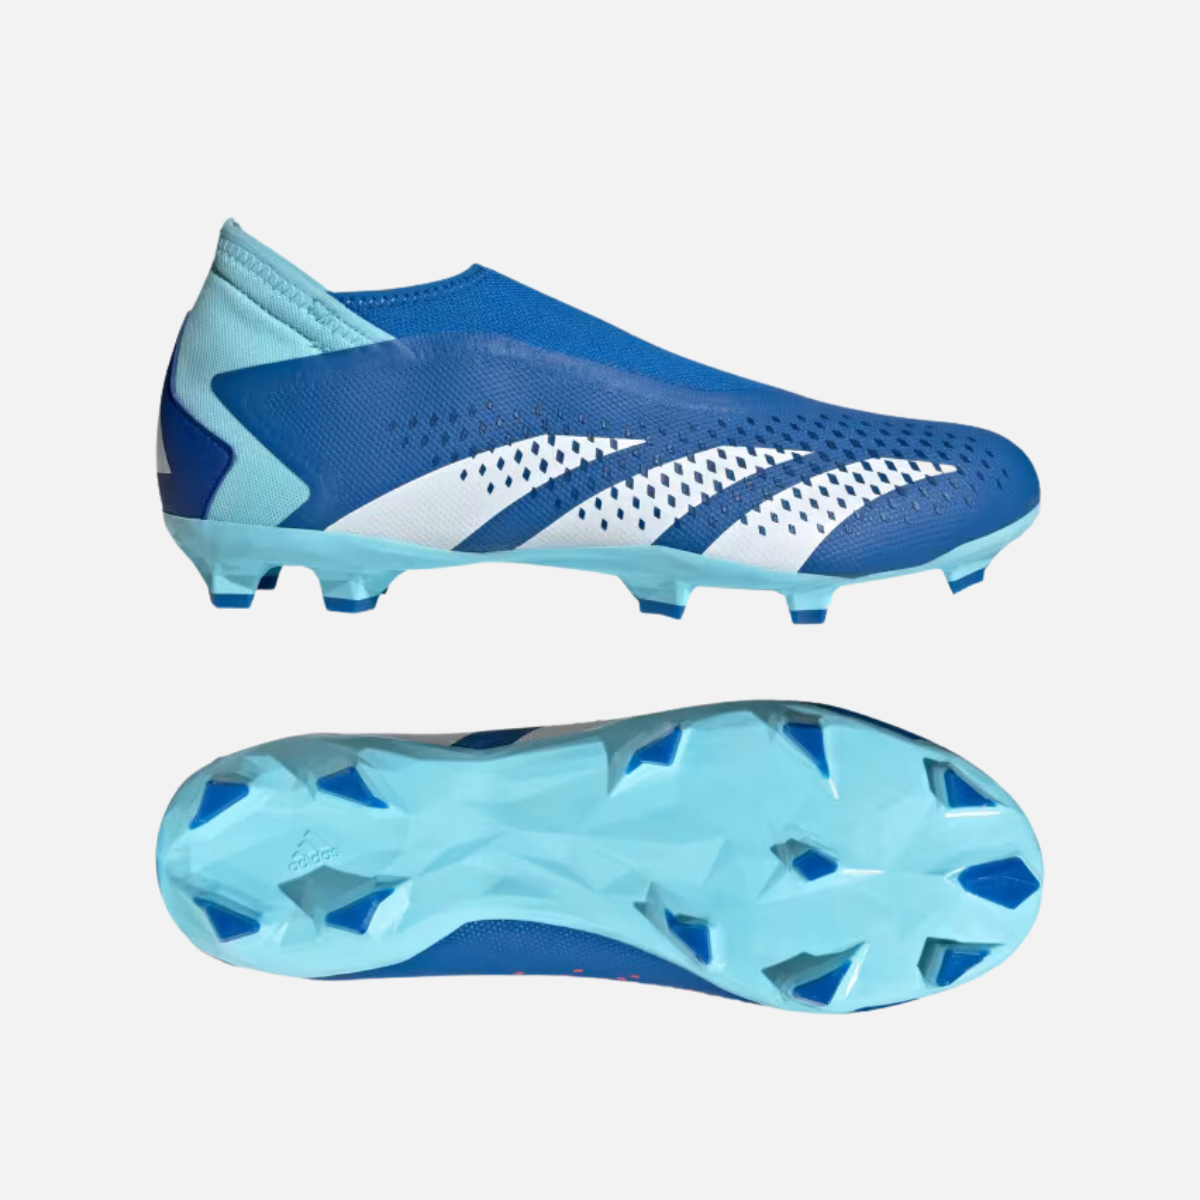 Adidas Predator Accuracy.3 Laceless Firm Ground Football Studs -Bright Royal/Cloud White/Bliss Blue